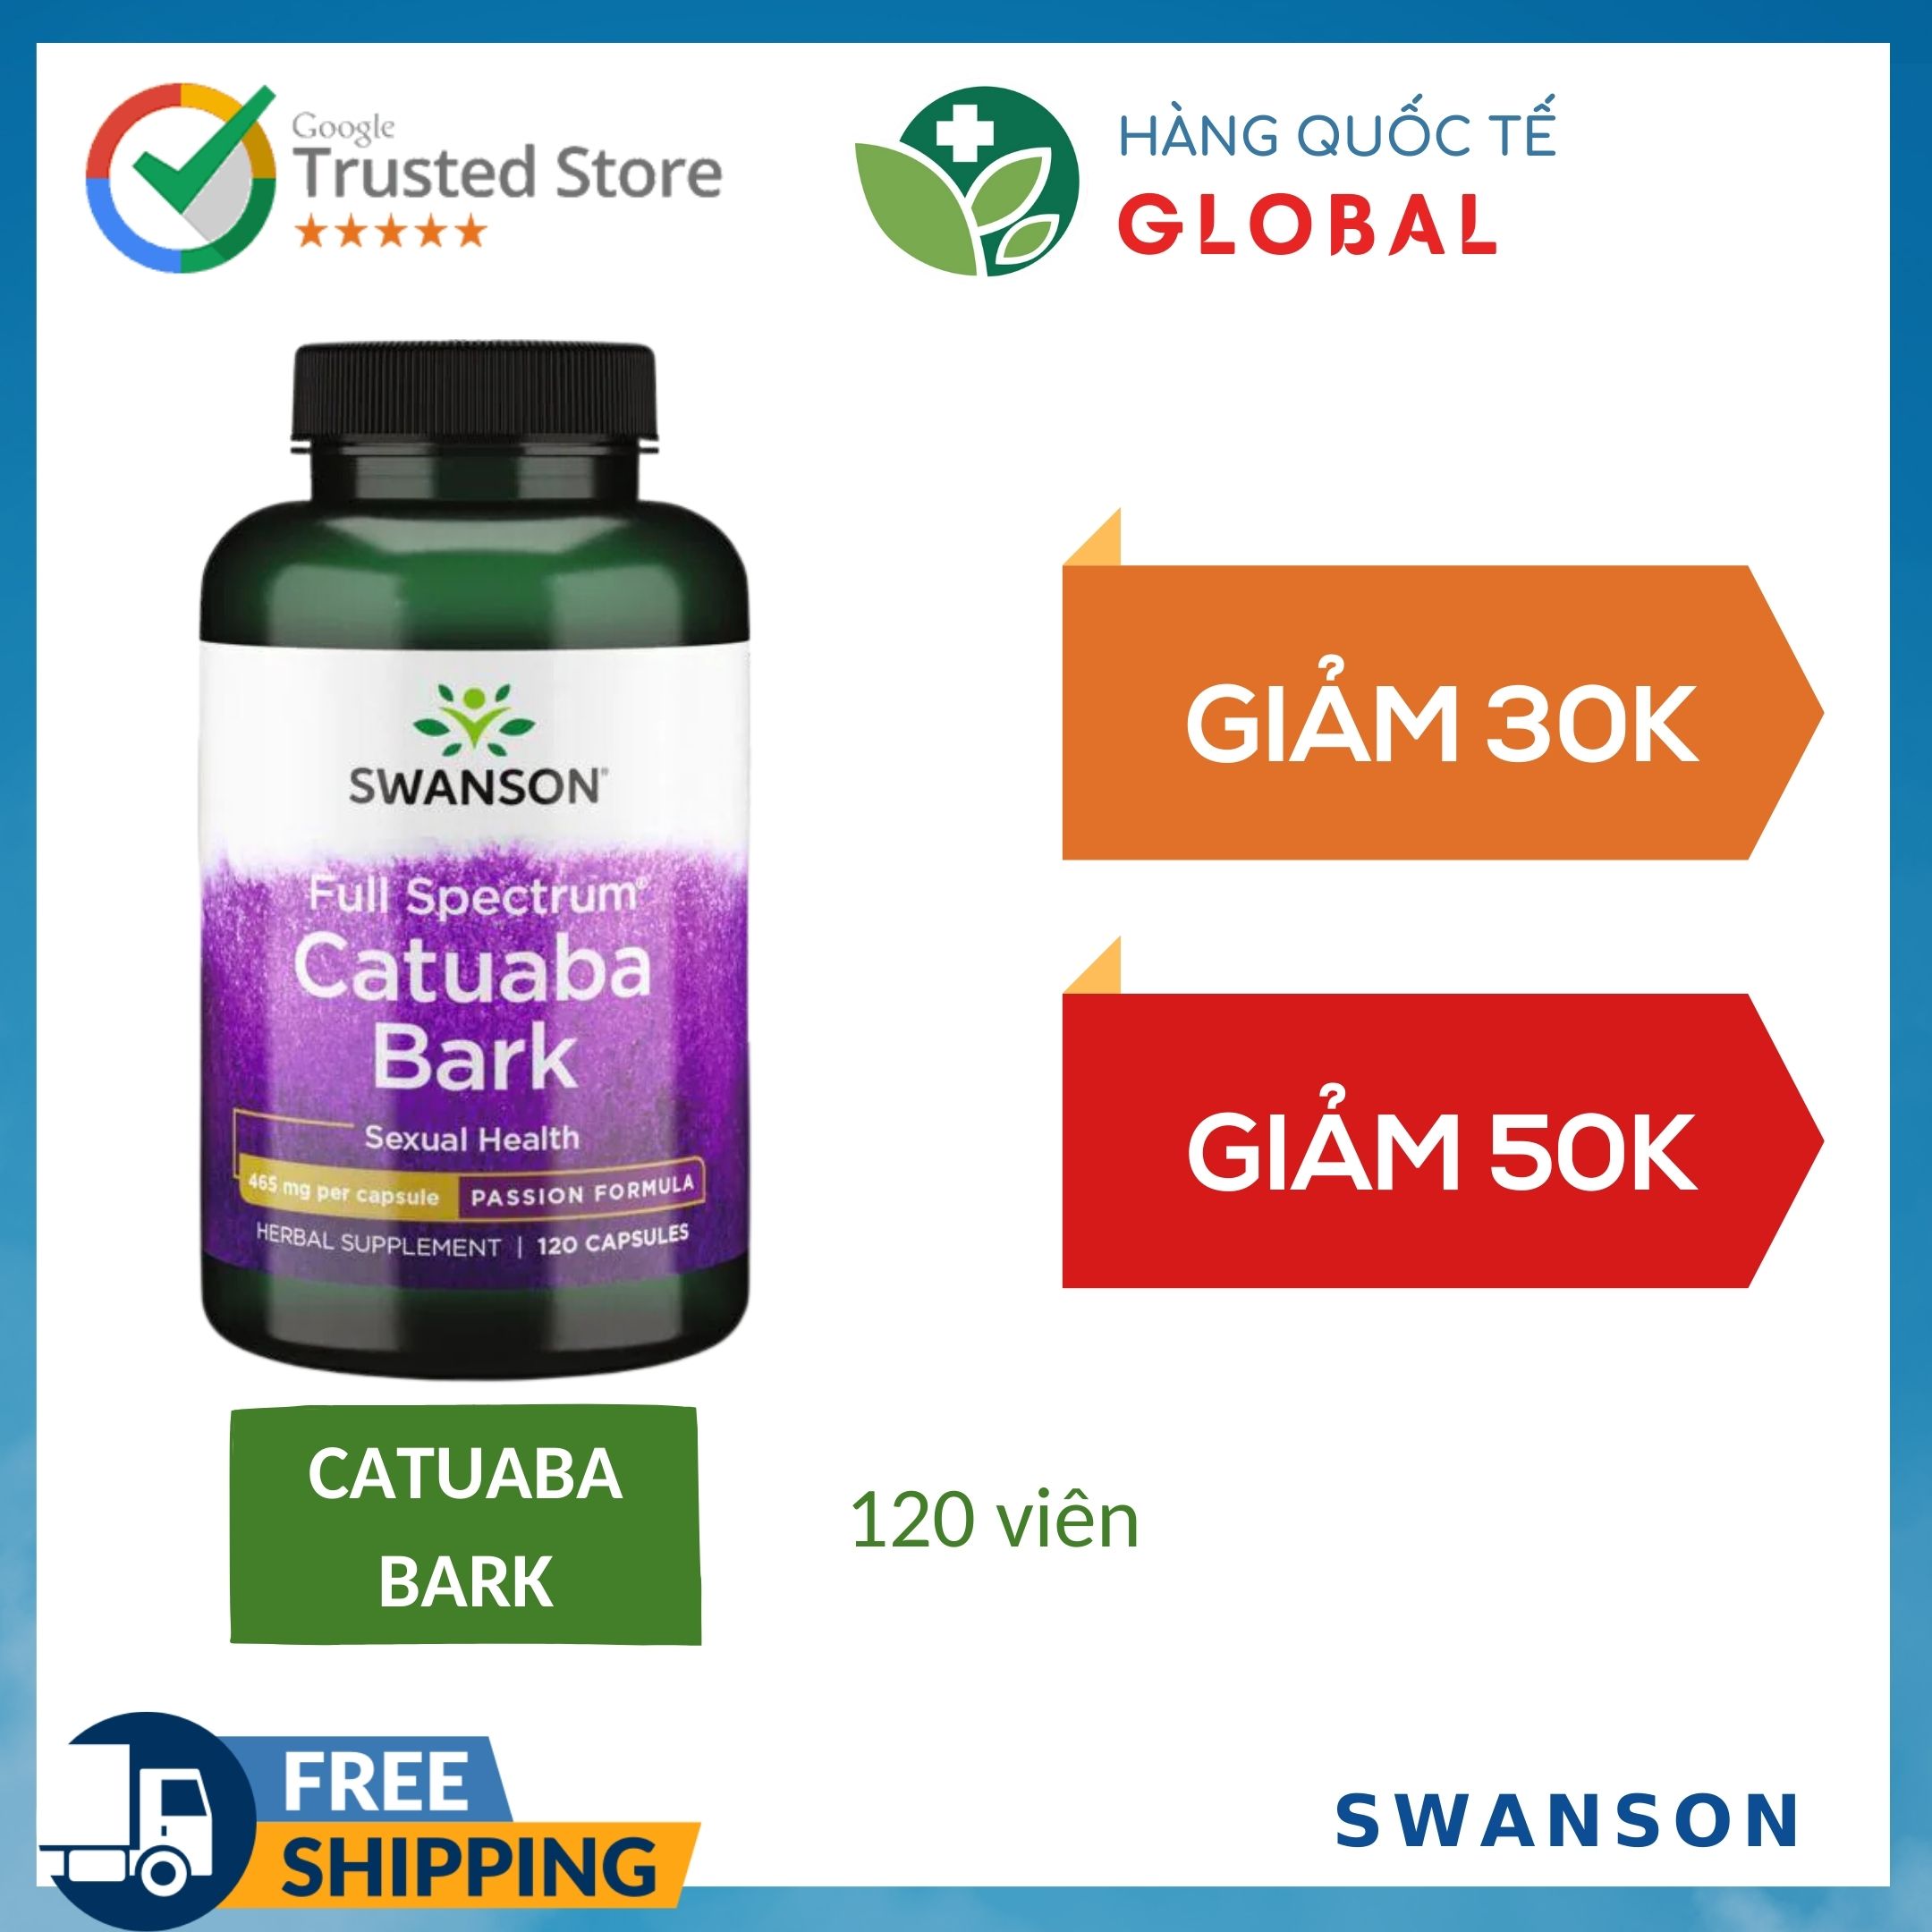 International Product SWANSON CATUABA BARK, 60 tablets, Supports